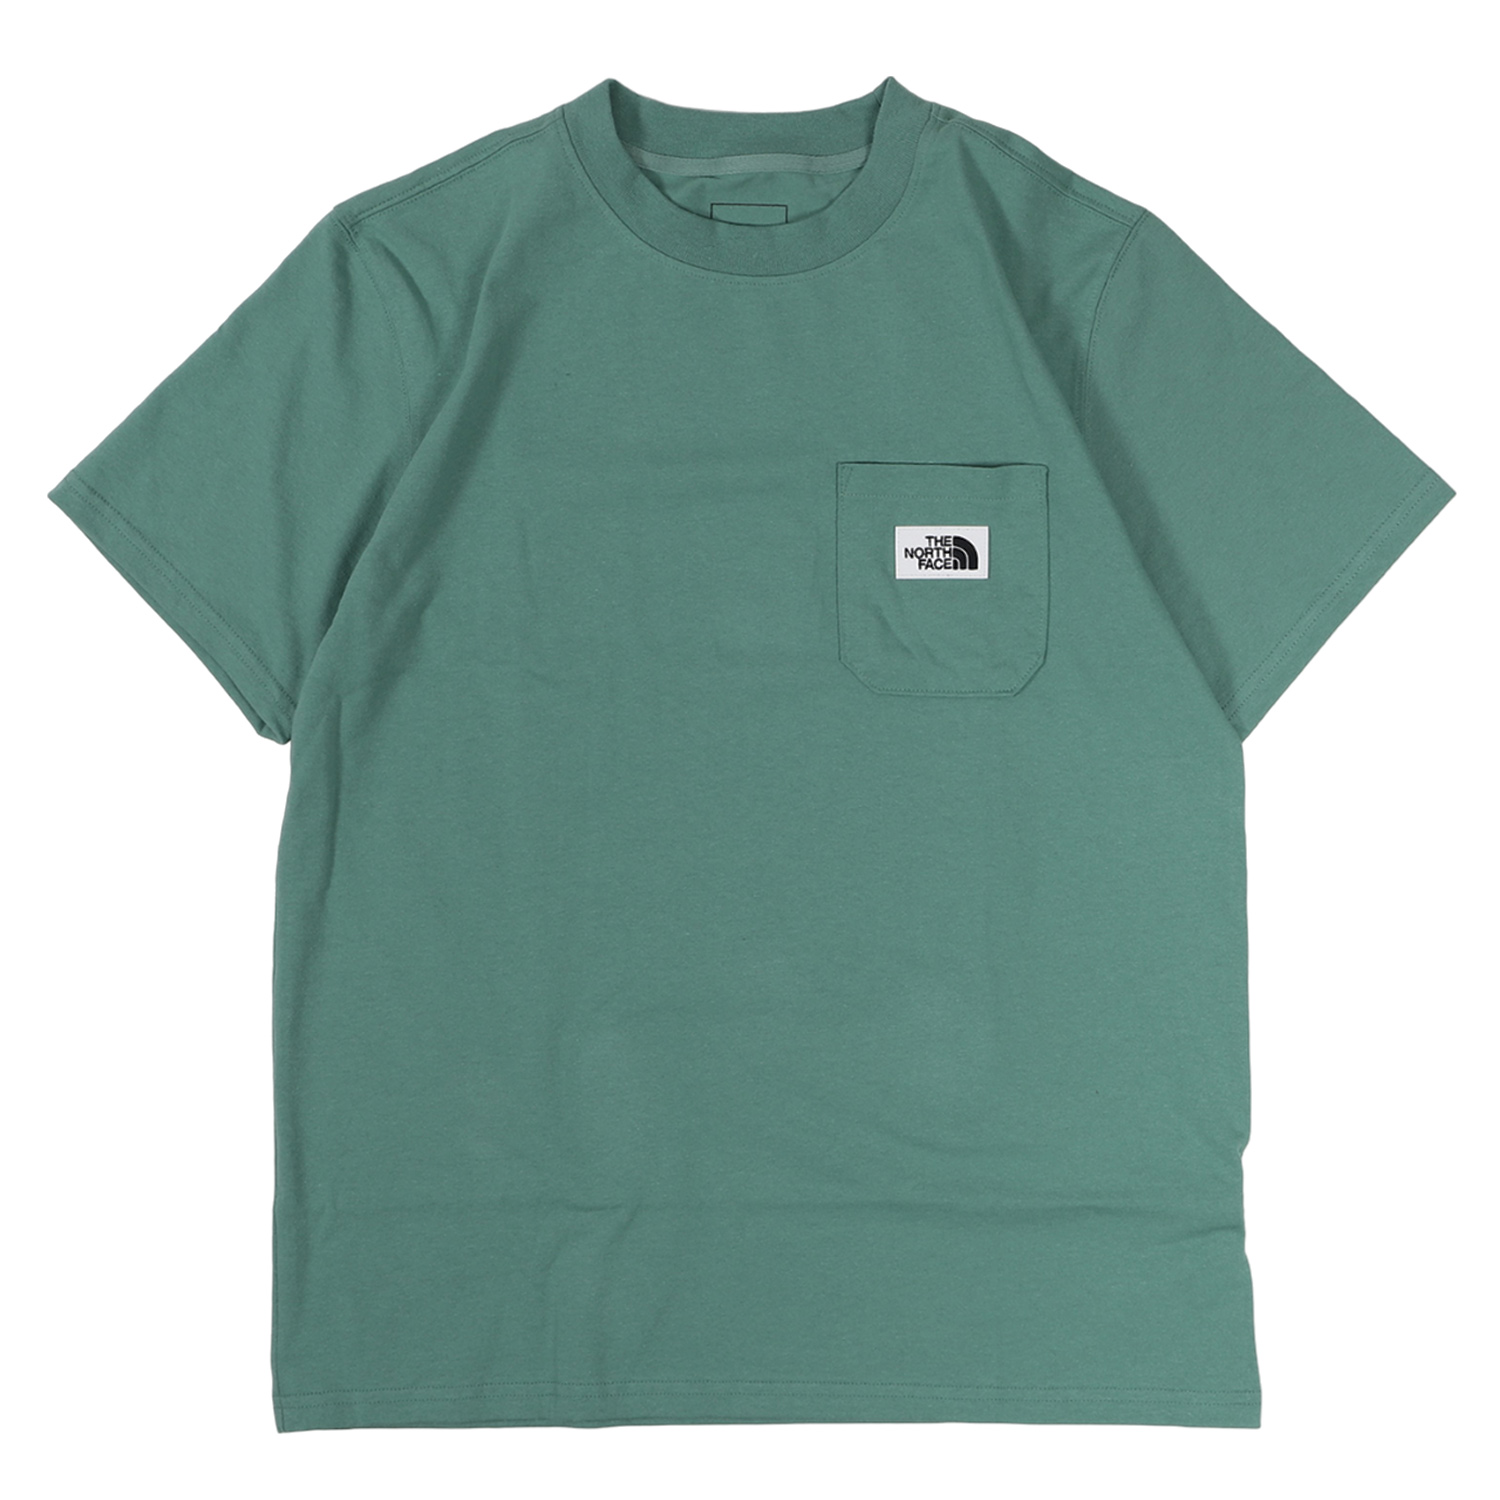 THE NORTH FACE Tシャツ メンズ ポケット 無地 M SS HERITAGE PATC...